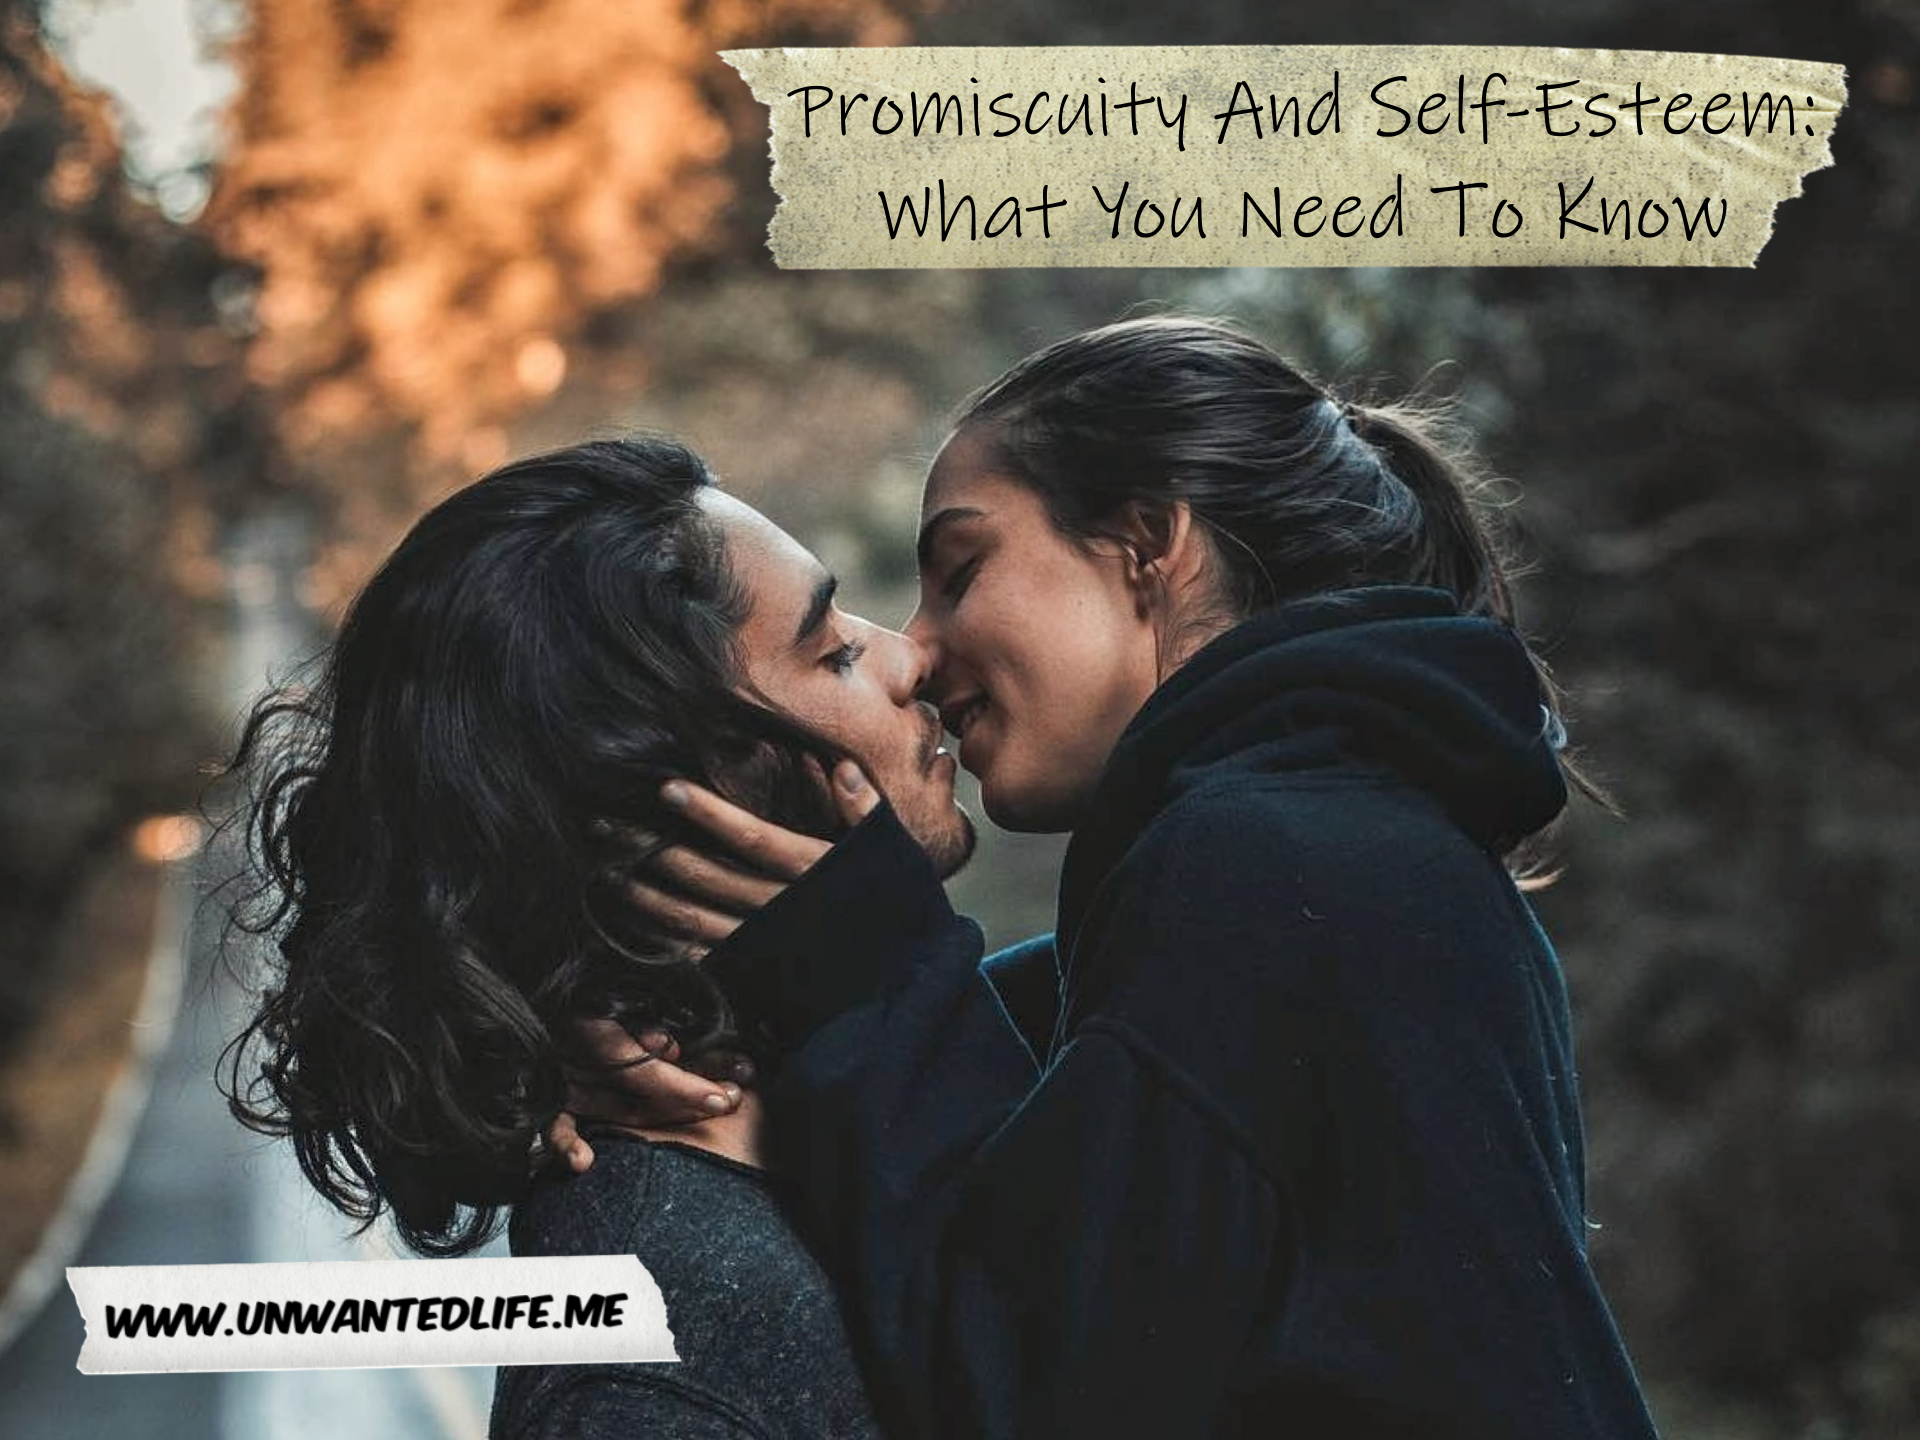 A photo of two people of Indian subcontinent heritage kissing on an autumn day to represent the title of the article - Promiscuity And Self-Esteem: What You Need To Know